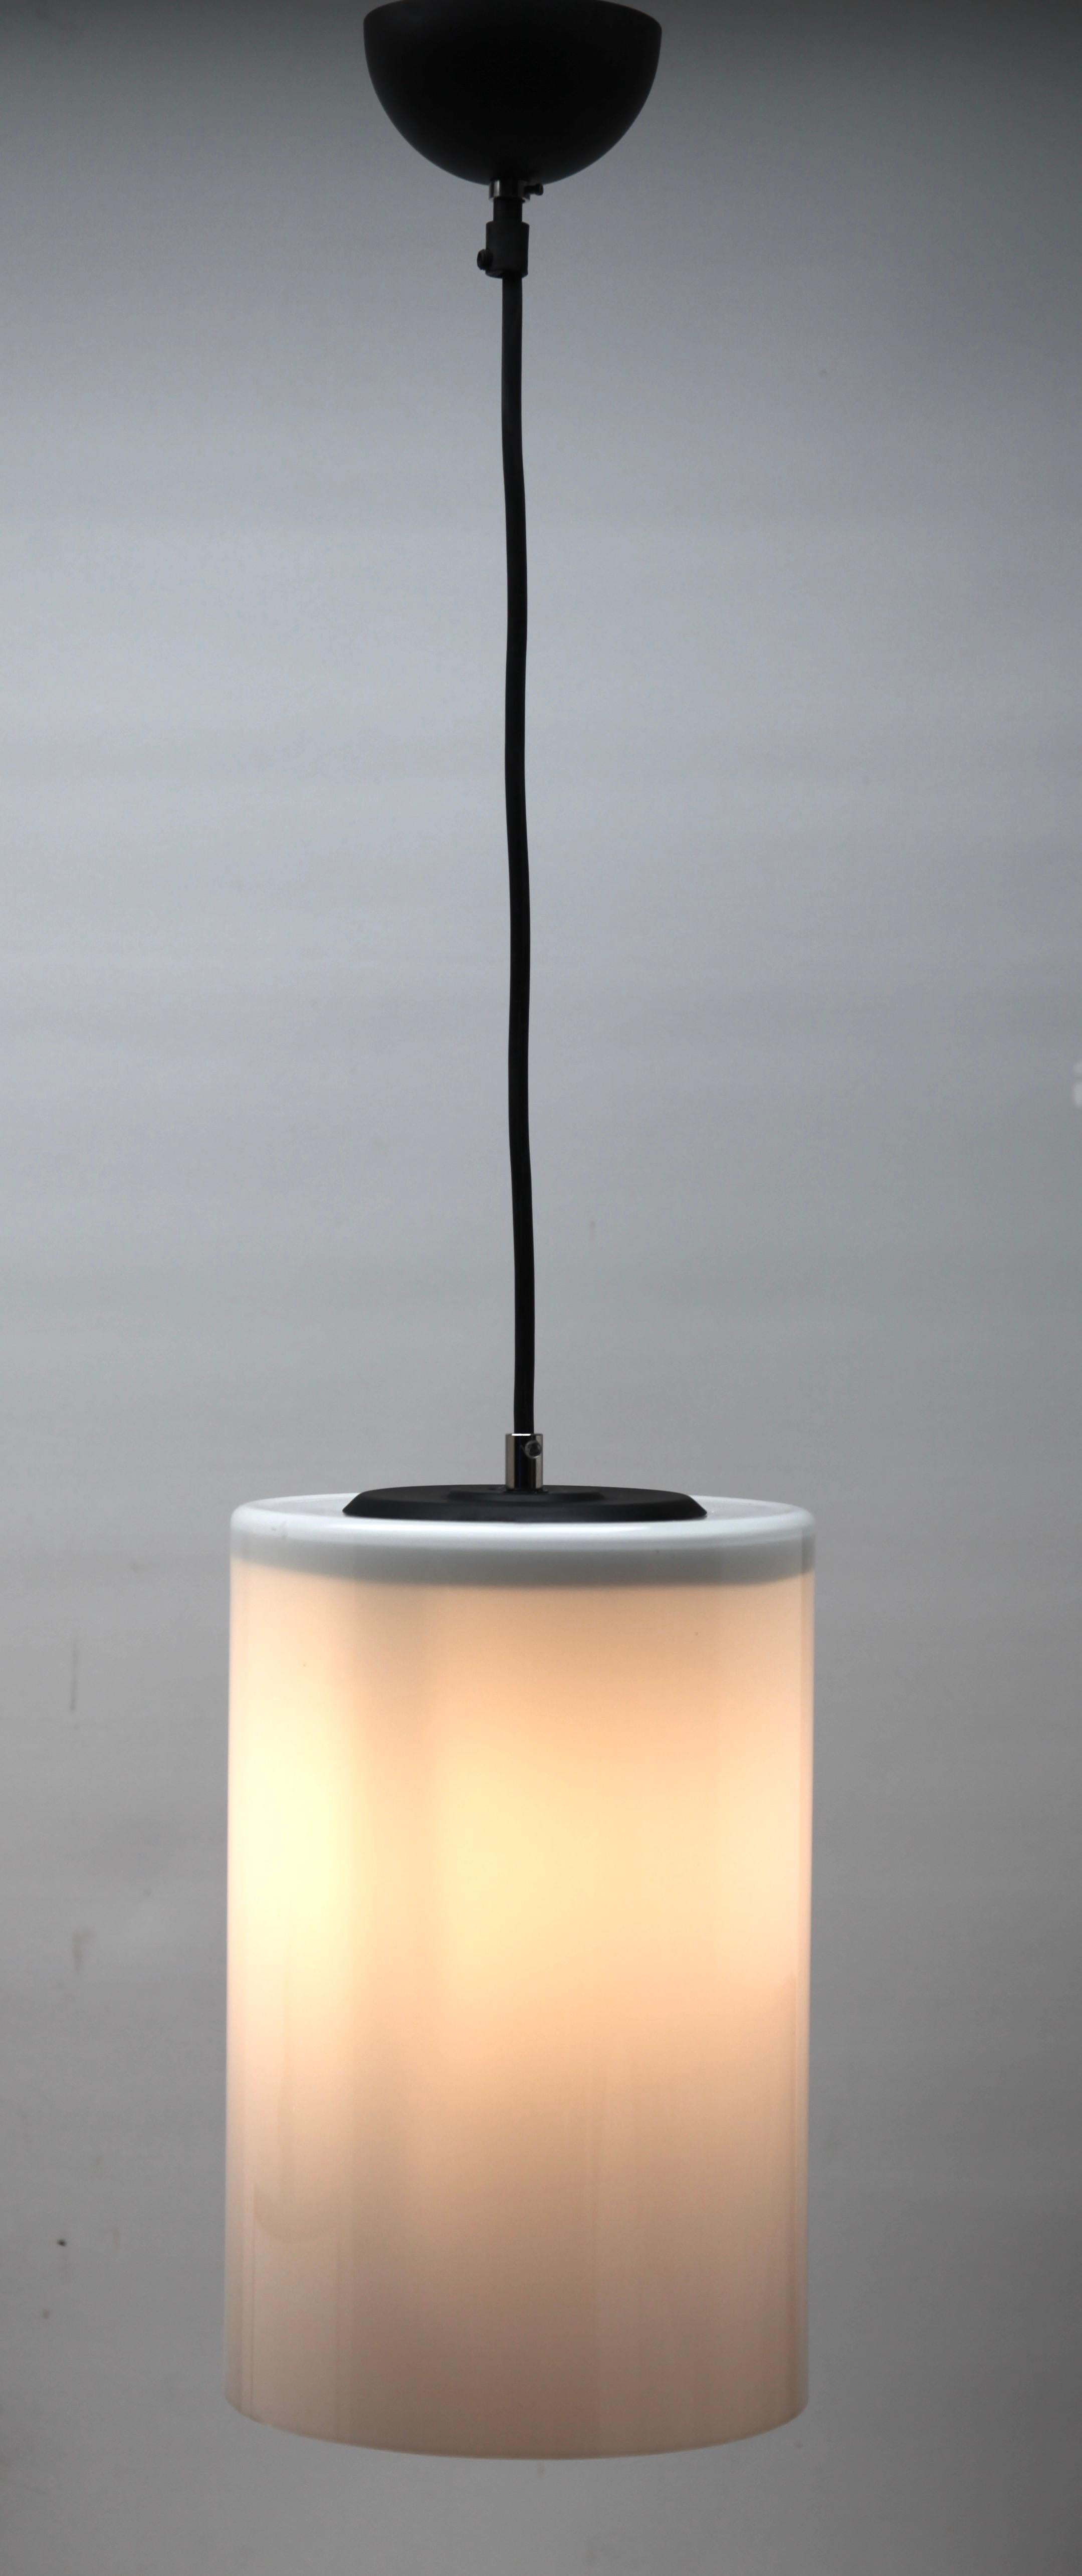 From the range by the Phillips Company, this centre-light is on an adjustable cable. 
The lamp has a fitting on a Black plate and holds a cylinder shape shade of opaline glass.

In good condition and in full working order with standard new lamp